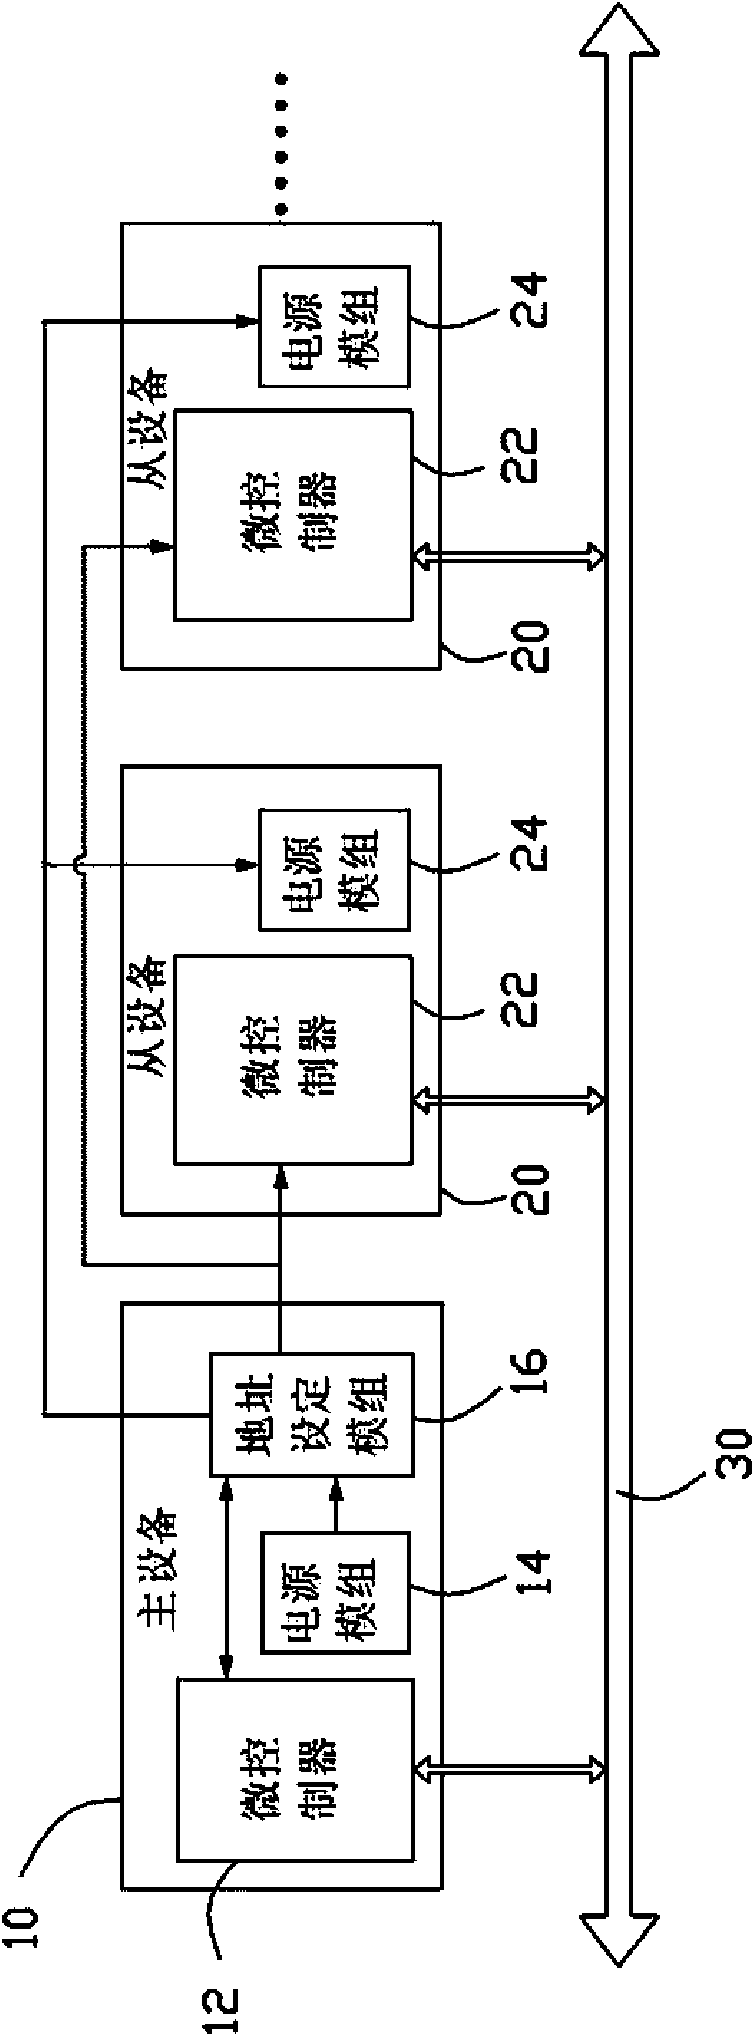 Master device and slave device communication circuit